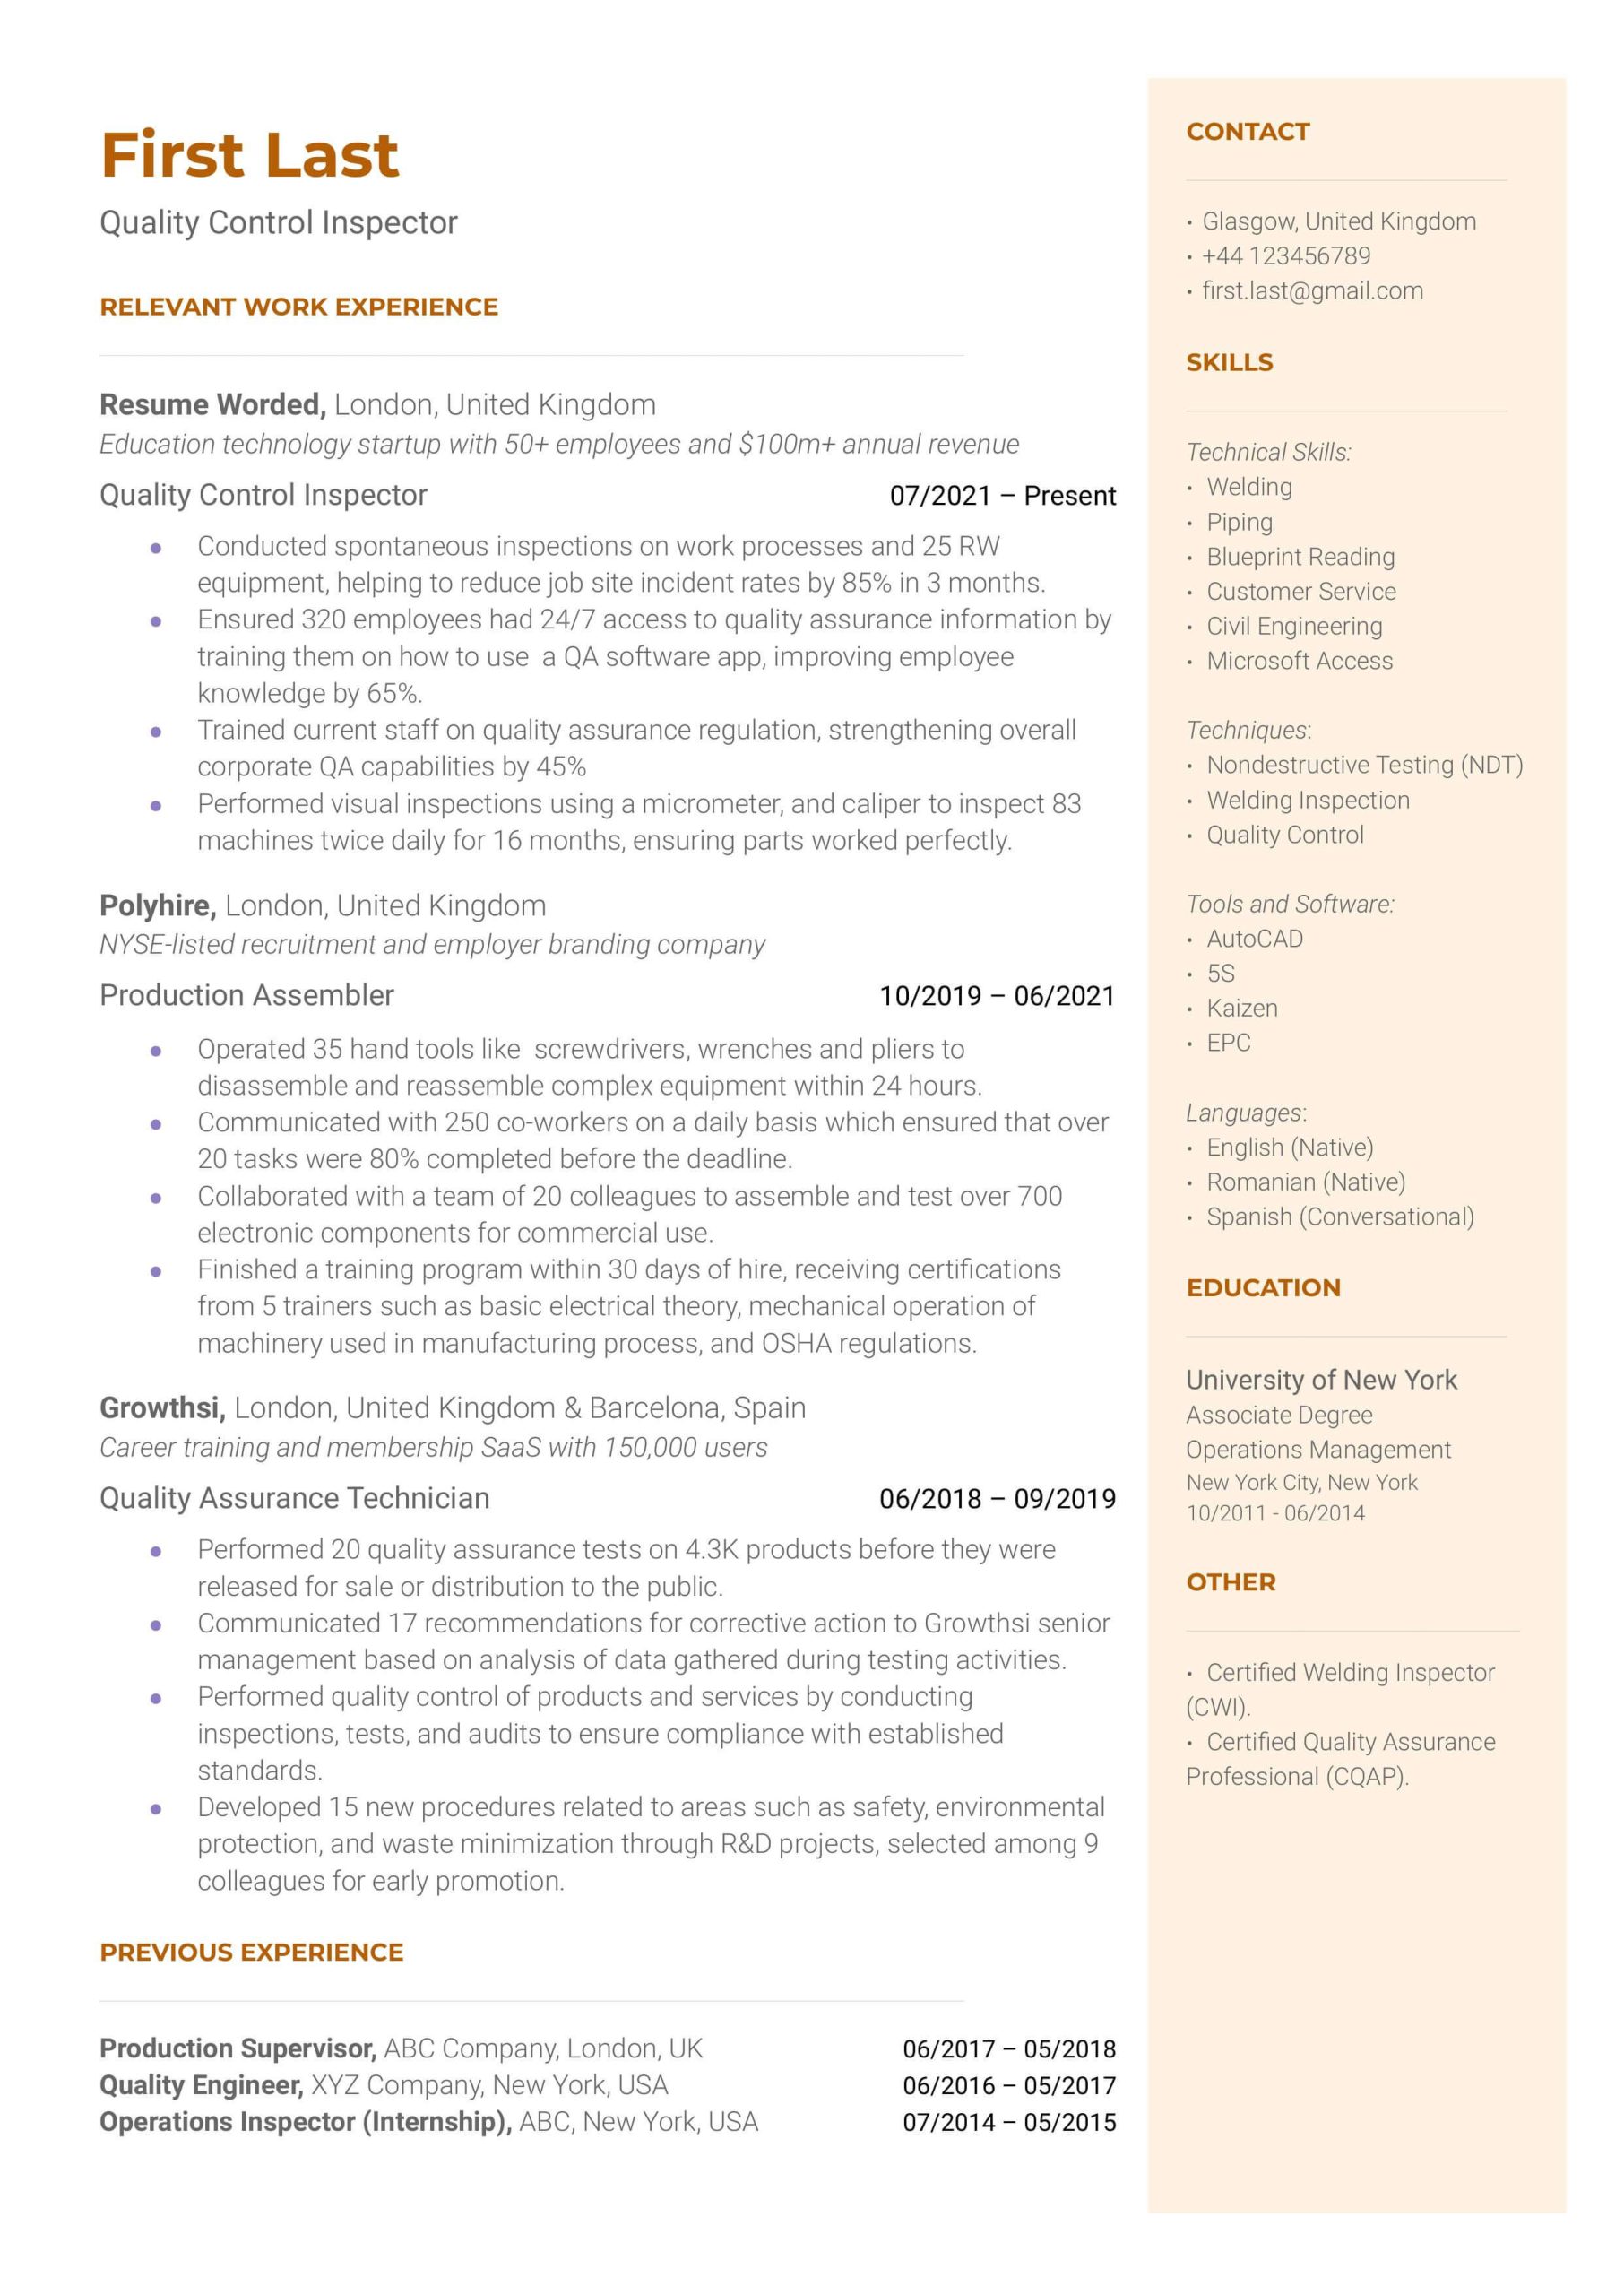 7 Years Experienced Qa Testing Sample Resume Quality Control Inspector Resume Example for 2022 Resume Worded